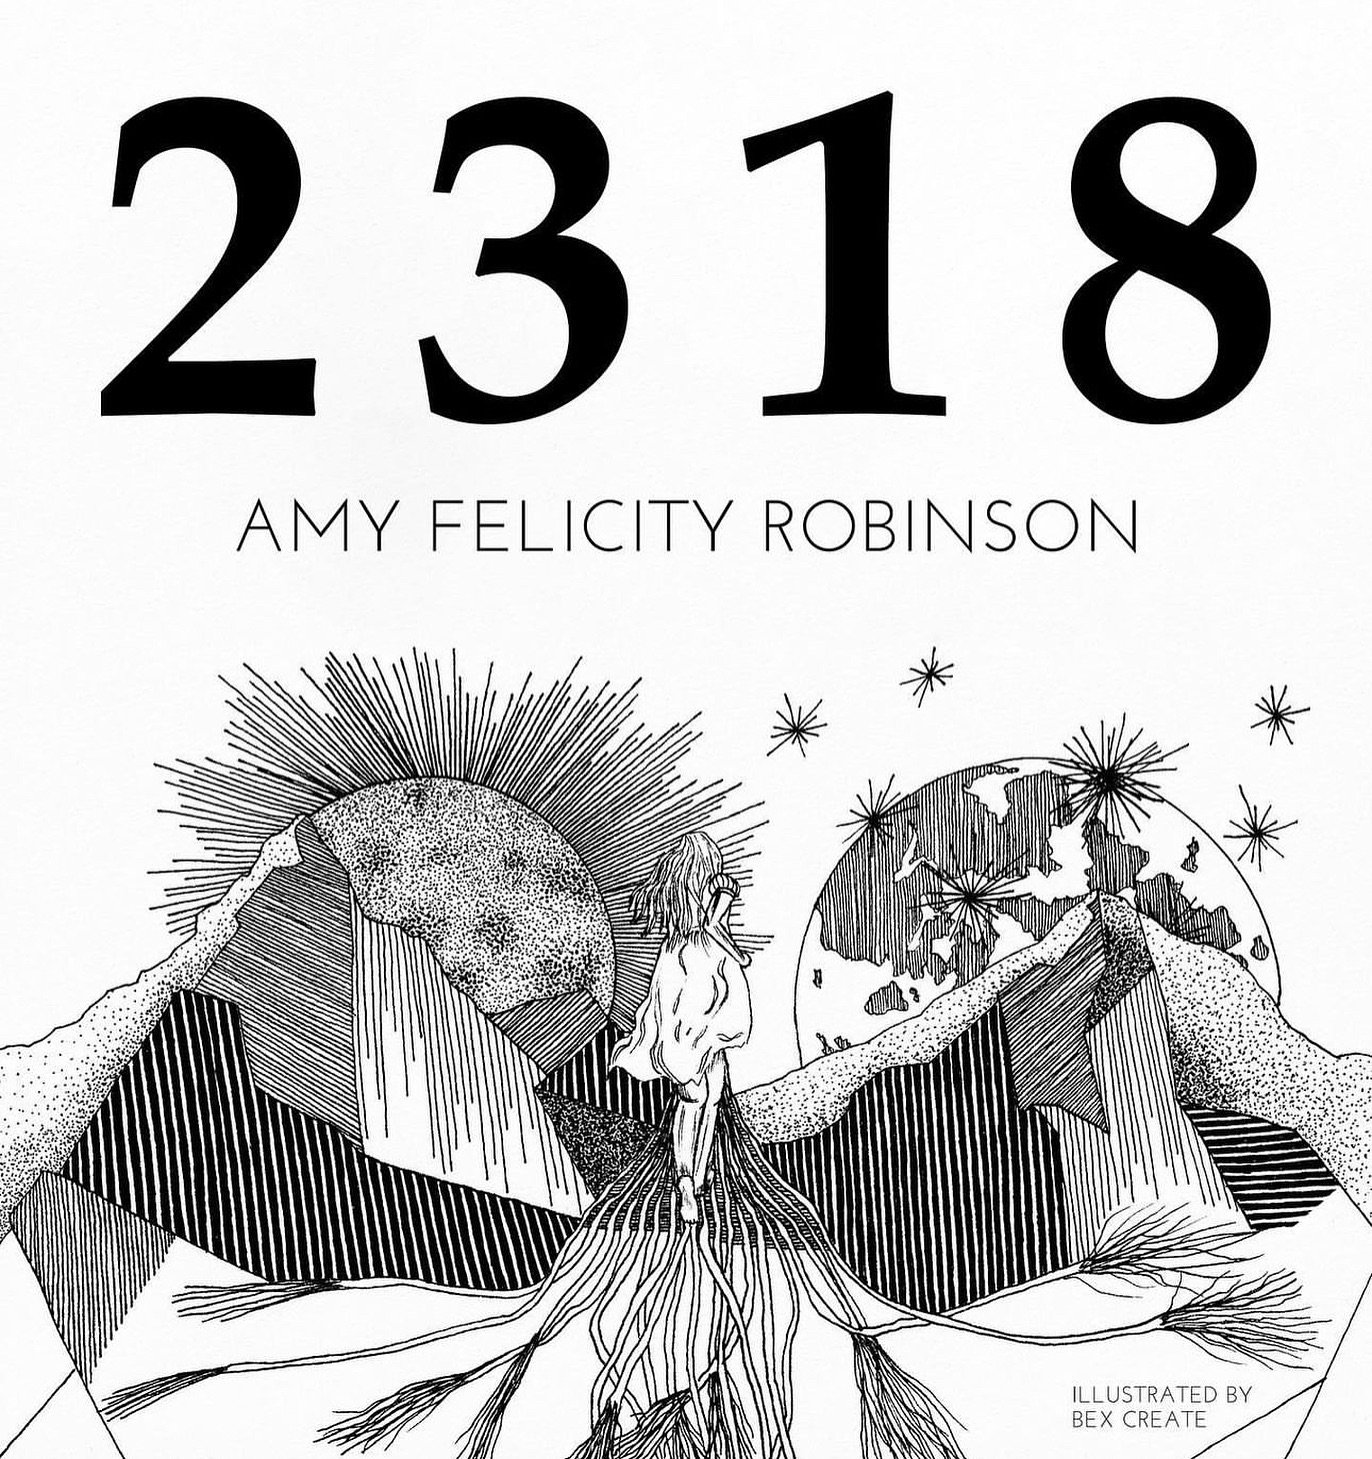 So @amyfelicity.poetry wrote a sci-fi audio book 2318 which combines incredible storytelling, spirituality and philosophy whilst set in the future. It&rsquo;s truly worth a listen 🎧 she then co-created with @bex_create_ to design and illustrate the 